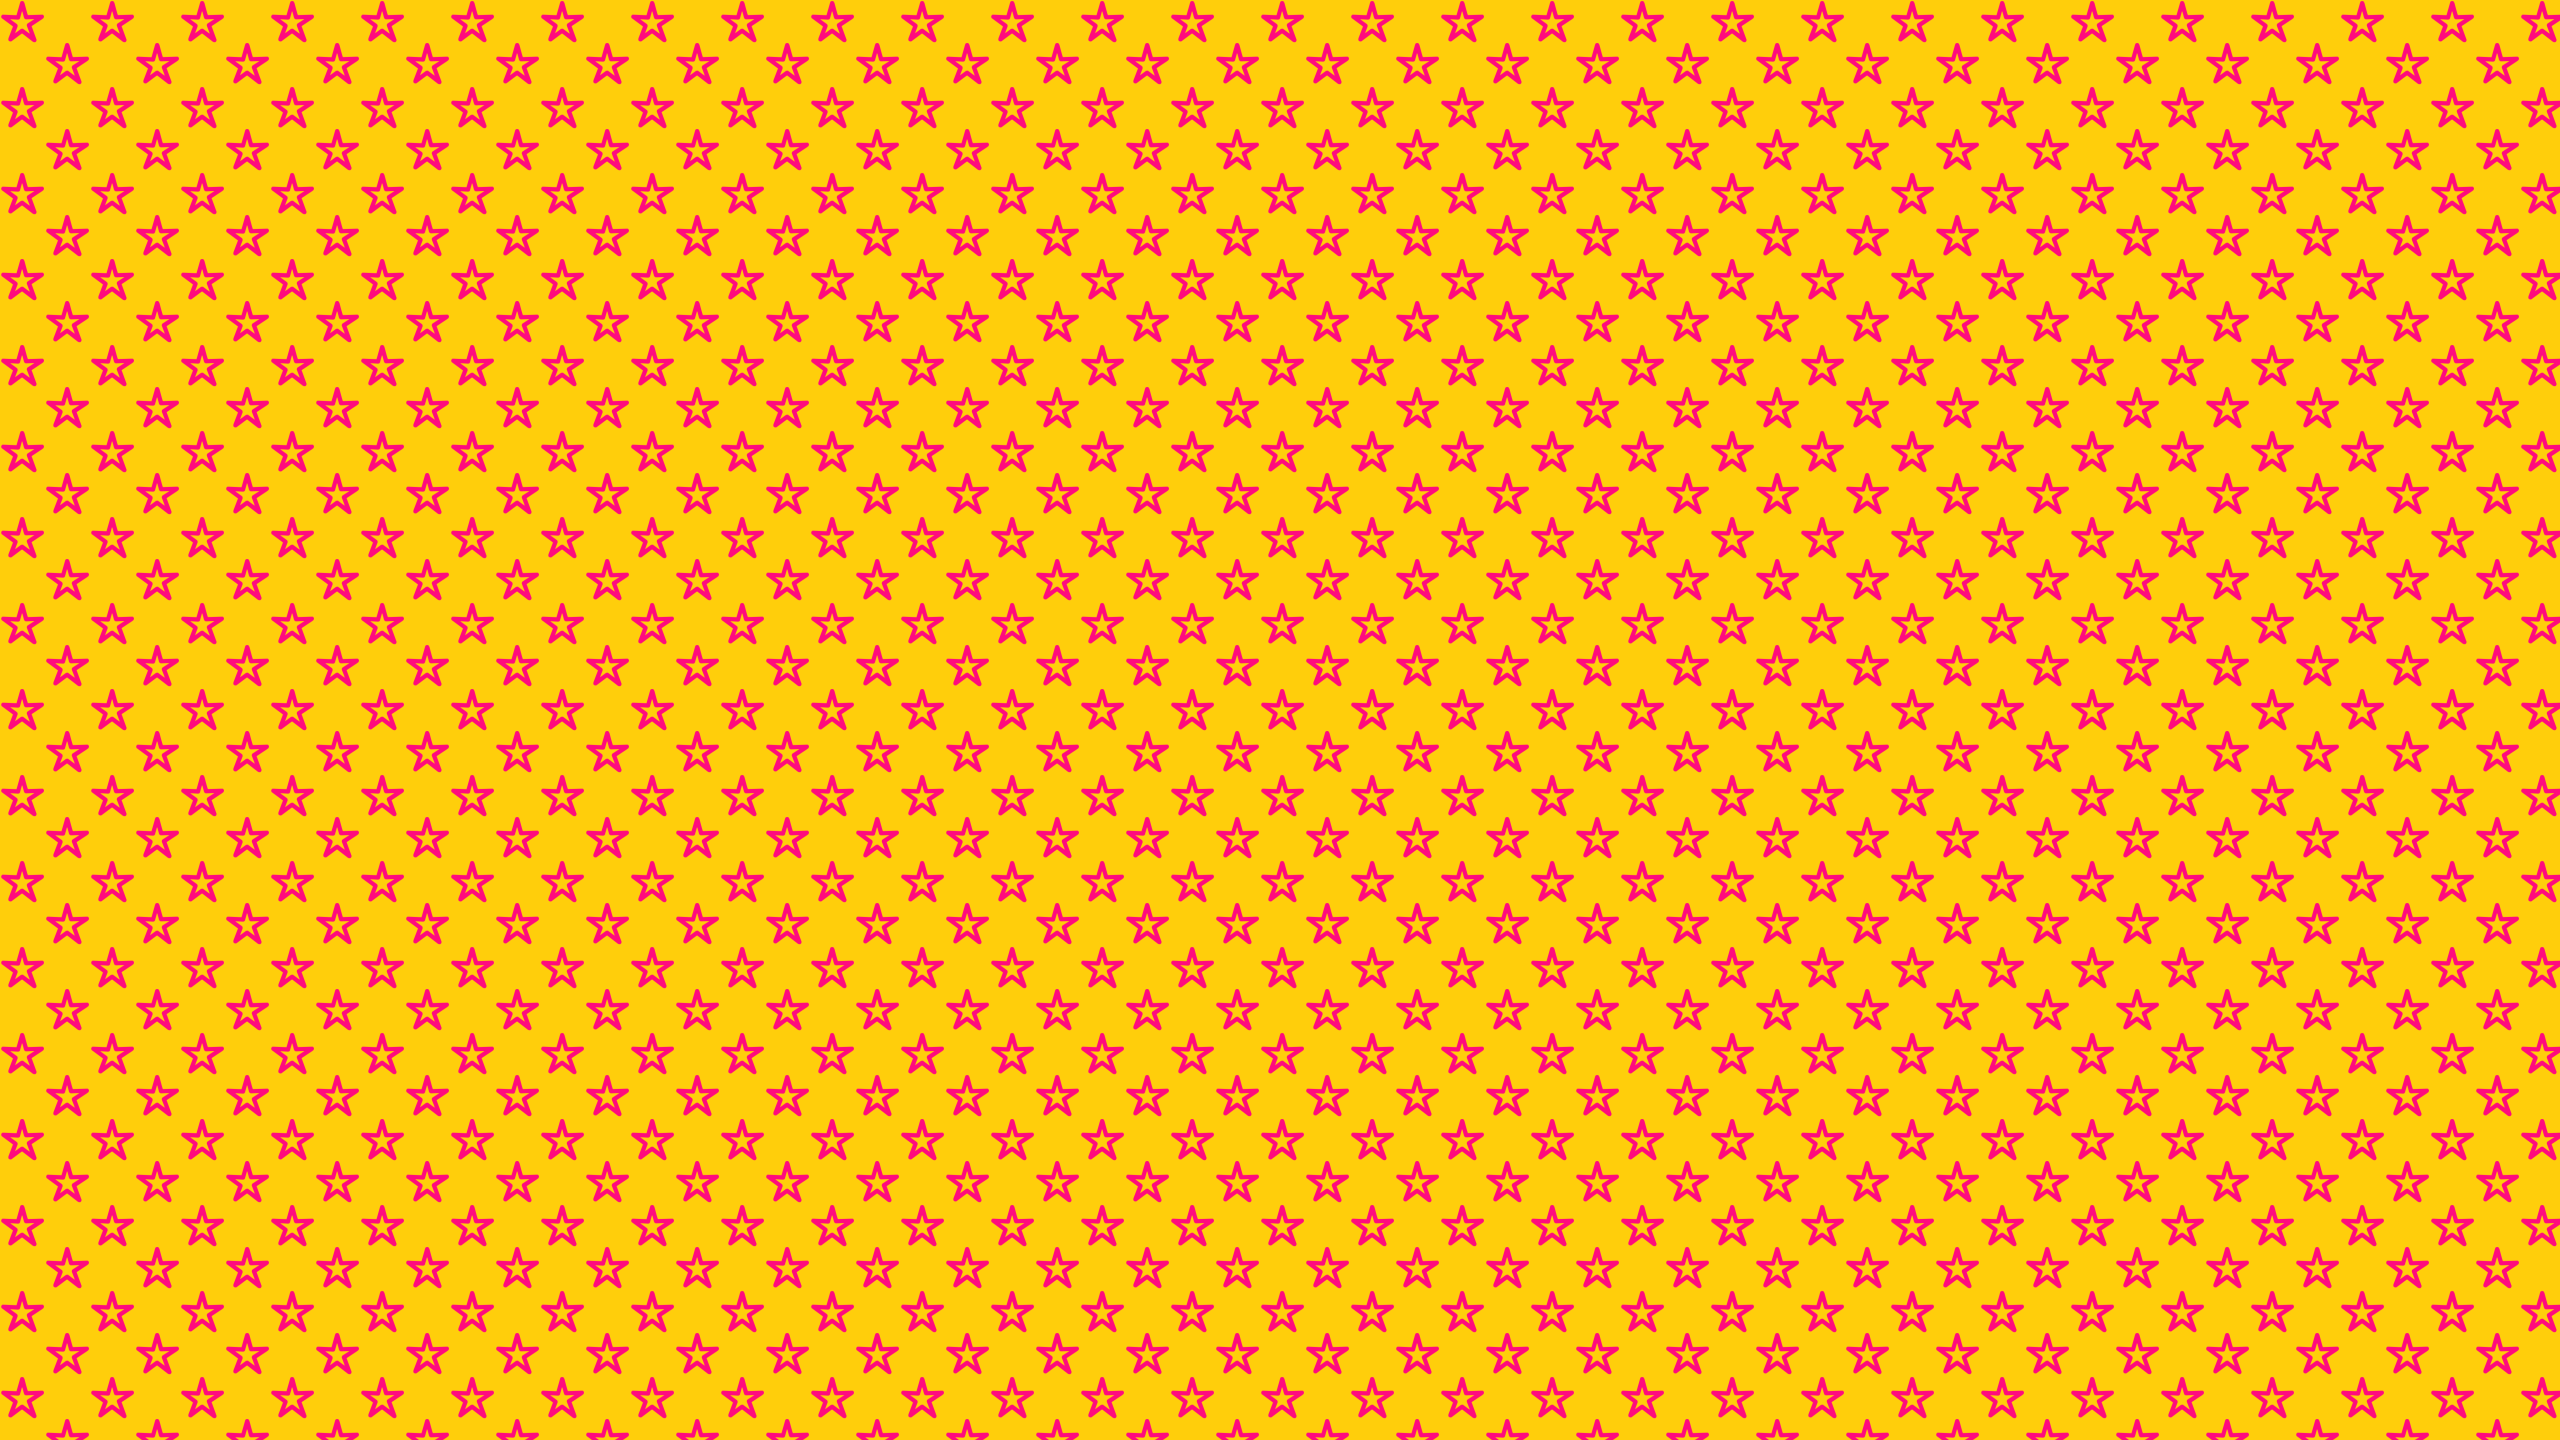 Yellow Pink Stars Desktop Wallpaper is easy. Just save the ...